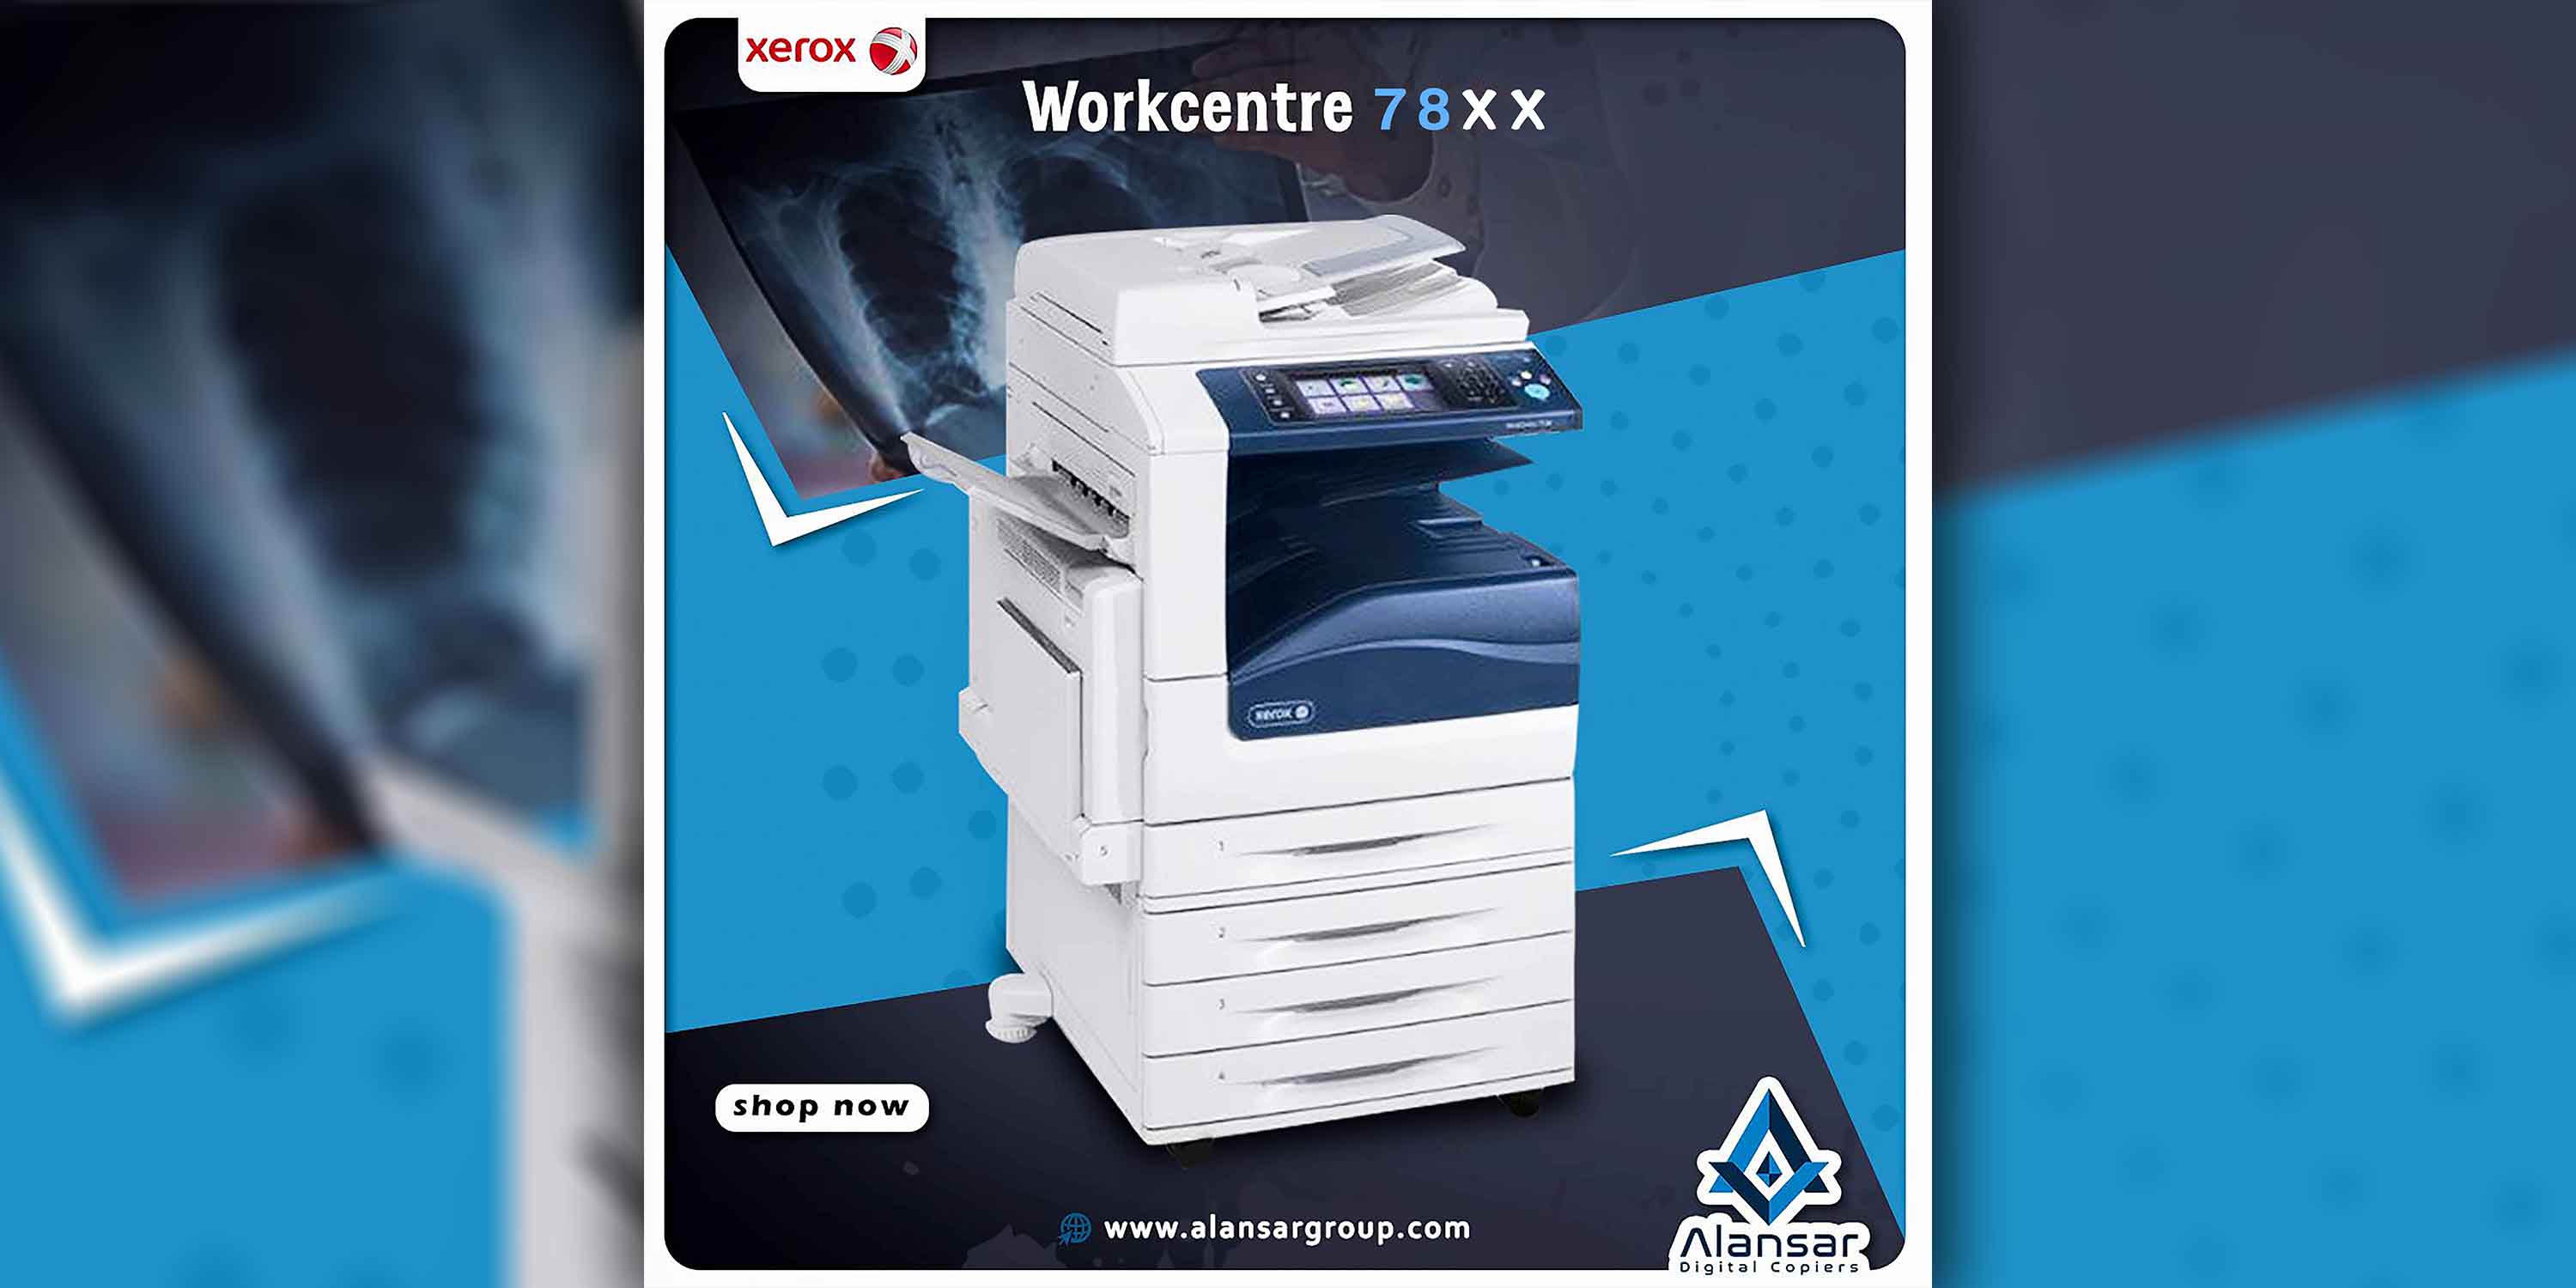 Xerox 78 Radiology Printer The Best Choice for Medical Image Printing